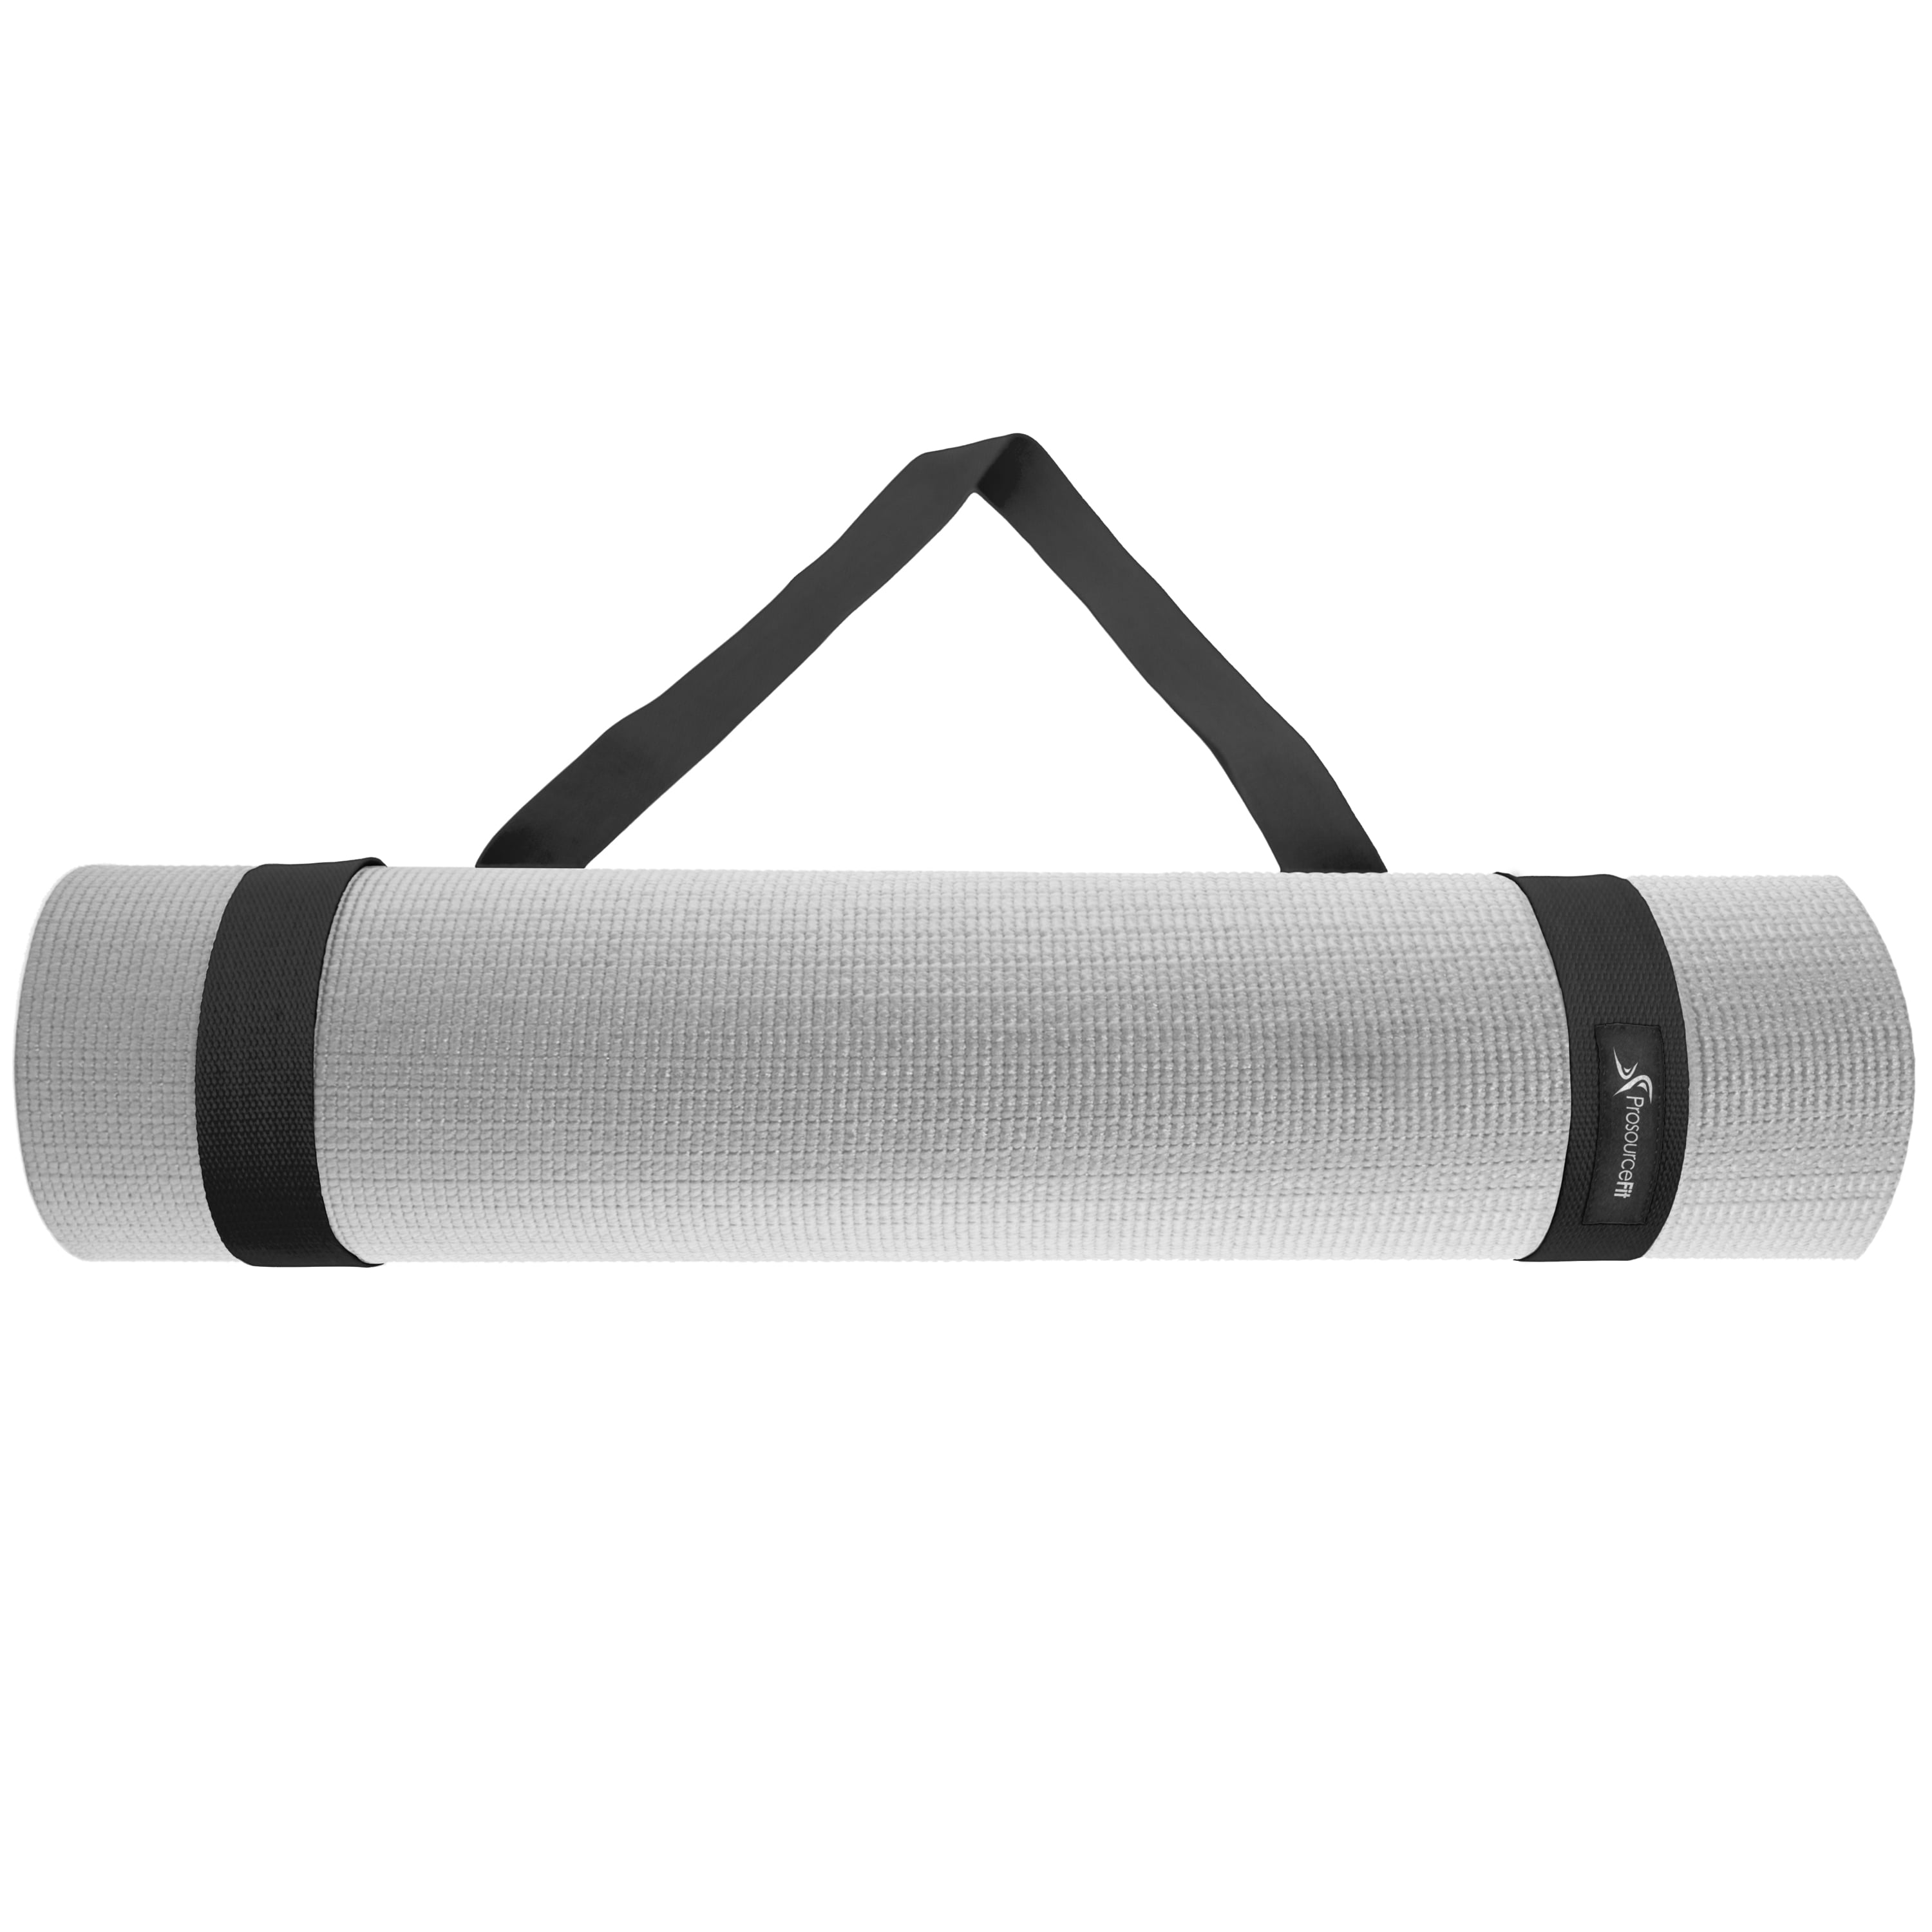 Polyester Yoga Mat Exercise Pad Looped Sling Harness Carrier Strap Holder A+